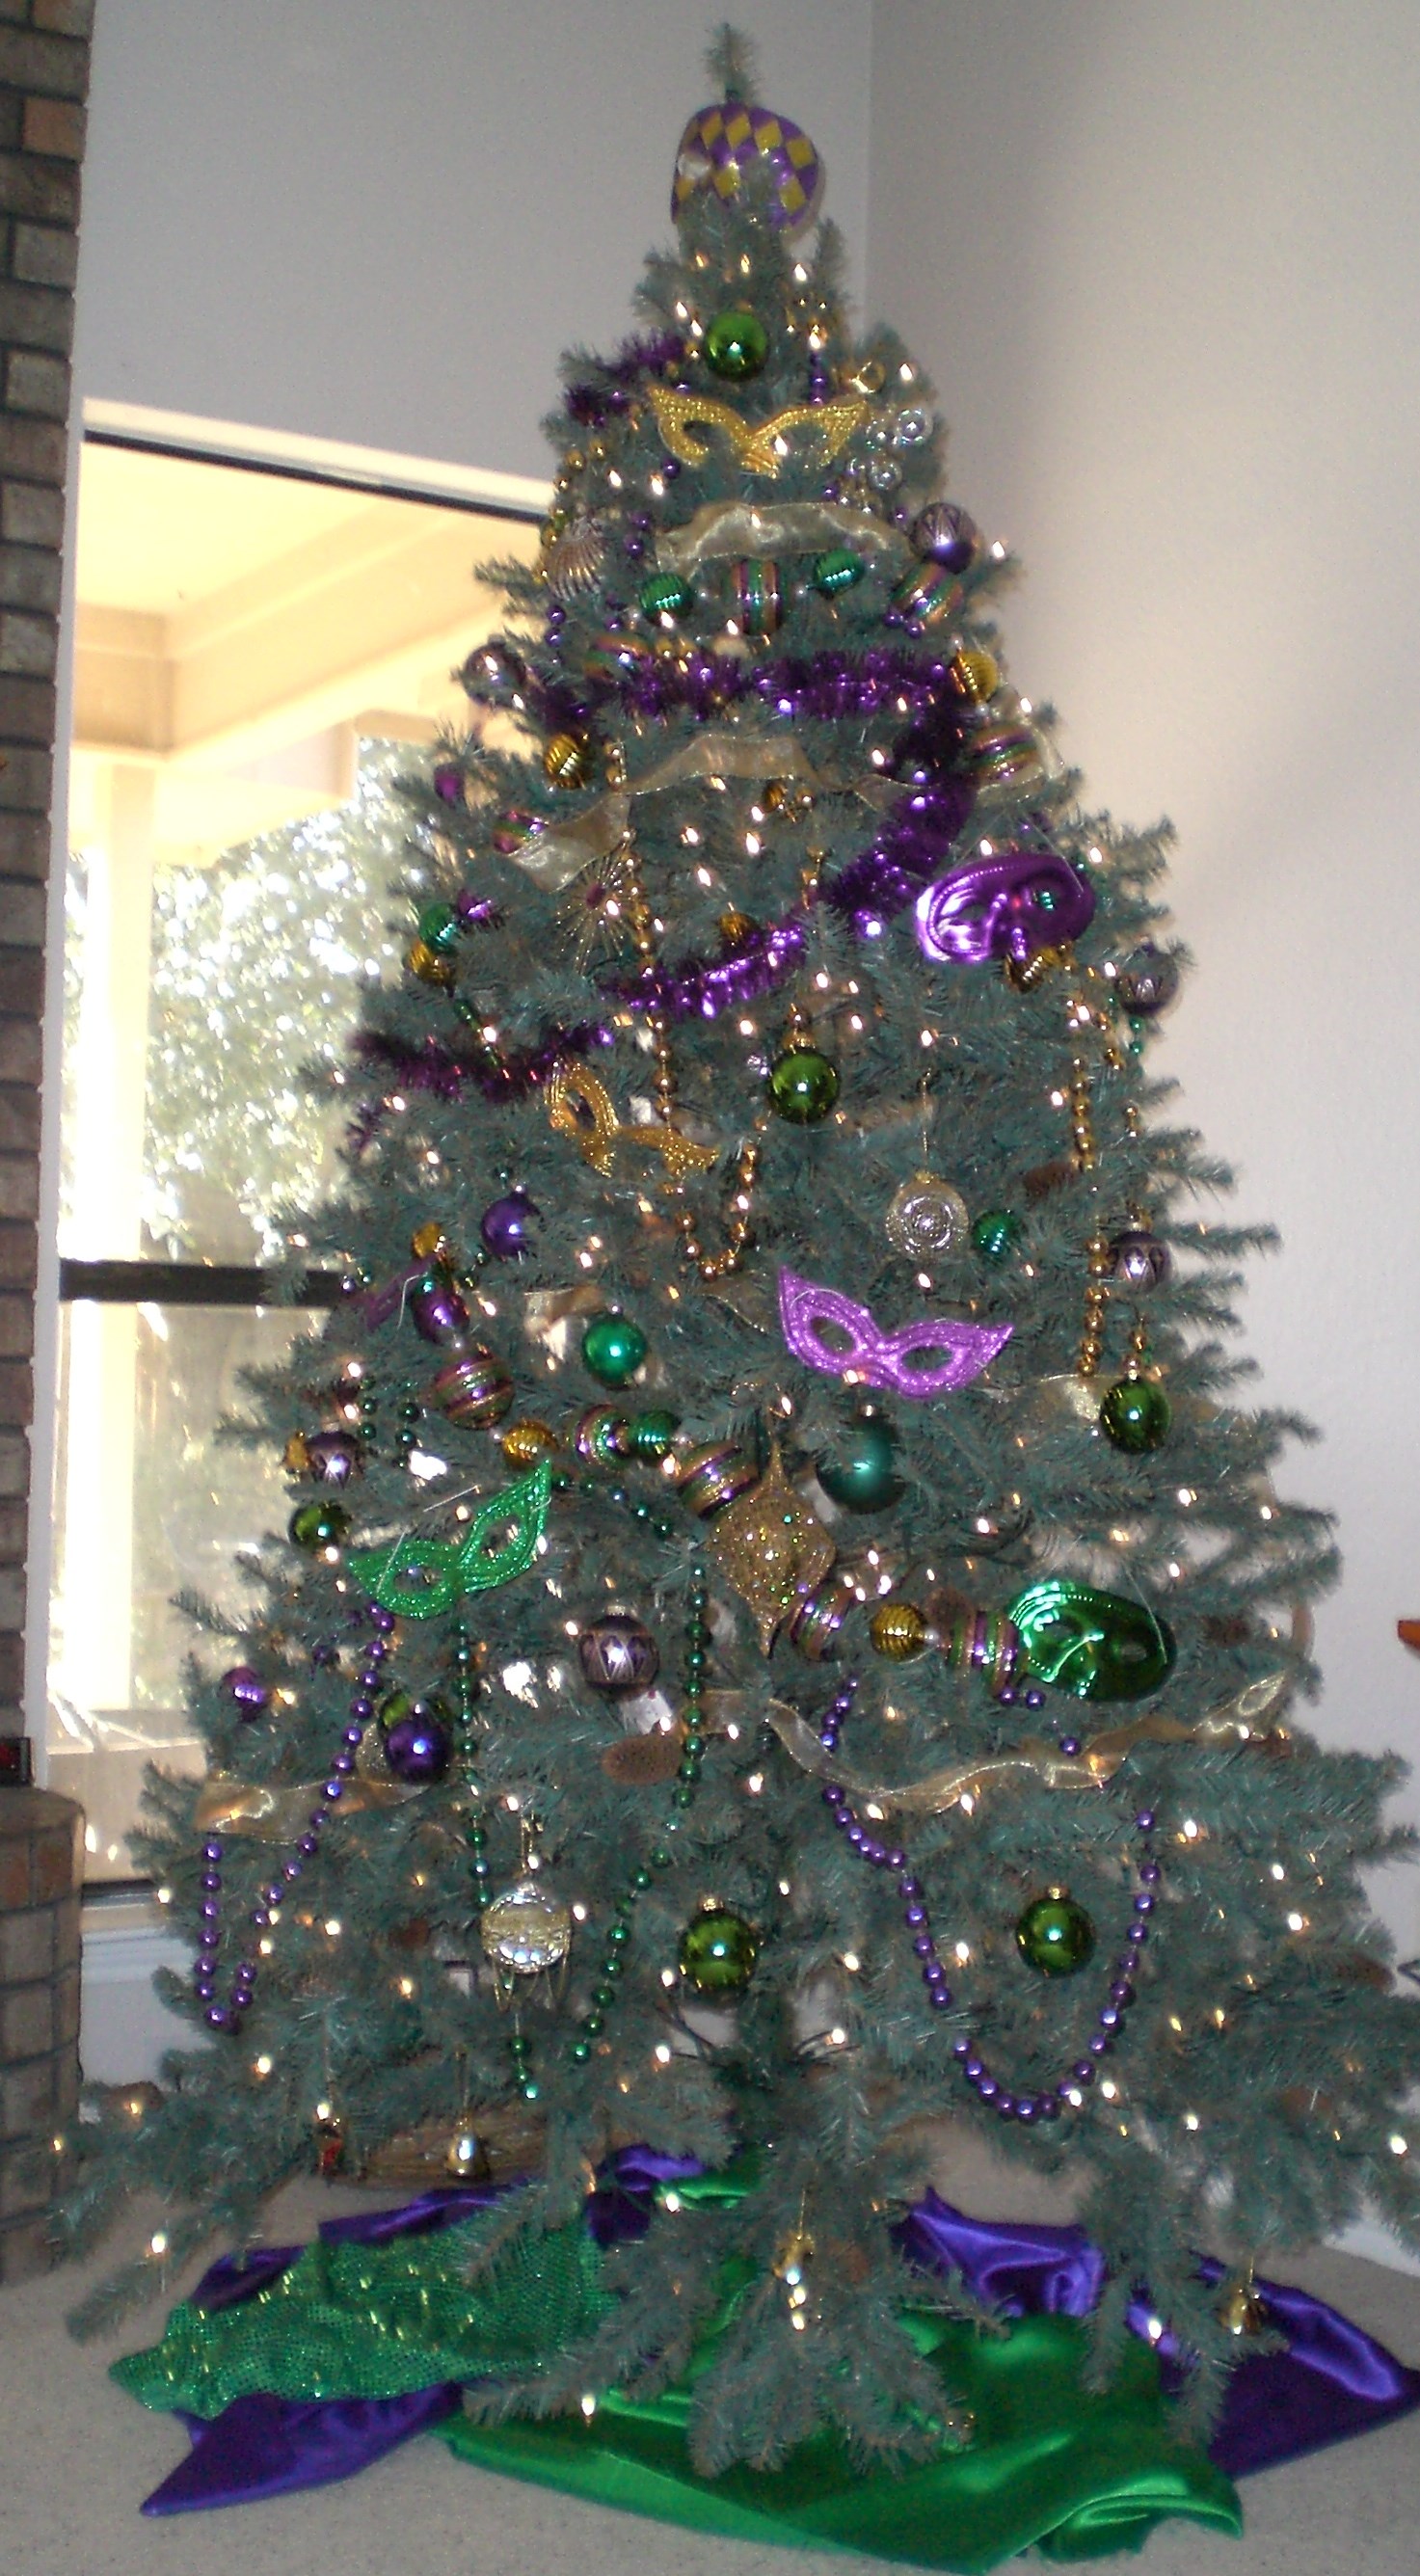 HOW TO DECORATE A Mardi Gras TREE